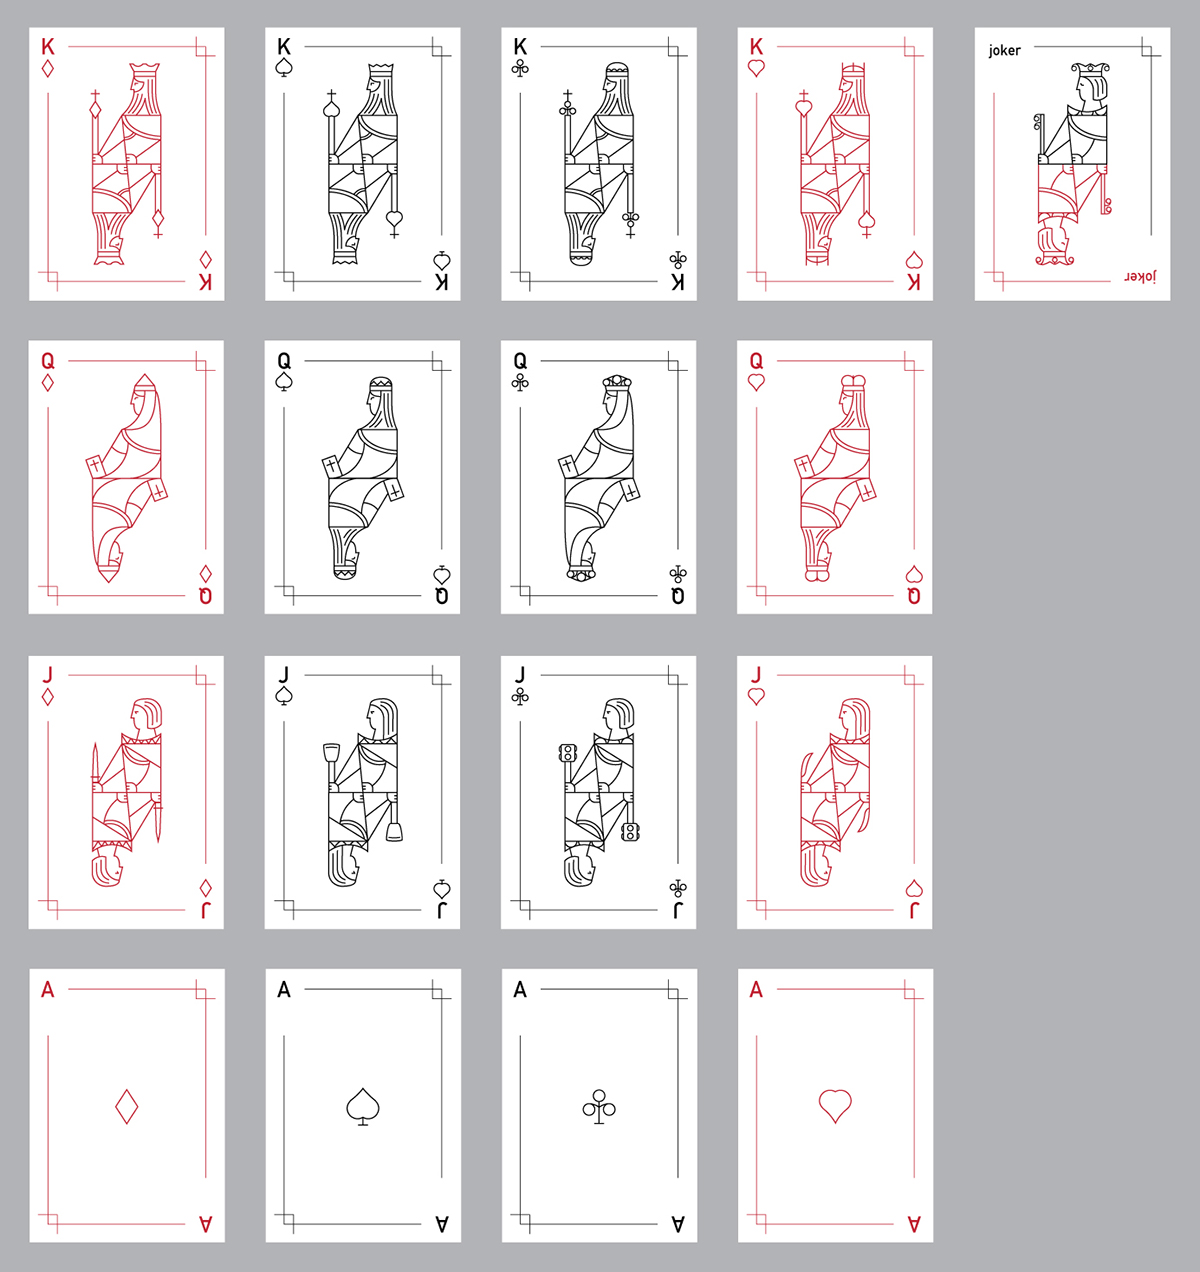 Playing Cards deck of cards cards line minimal clean